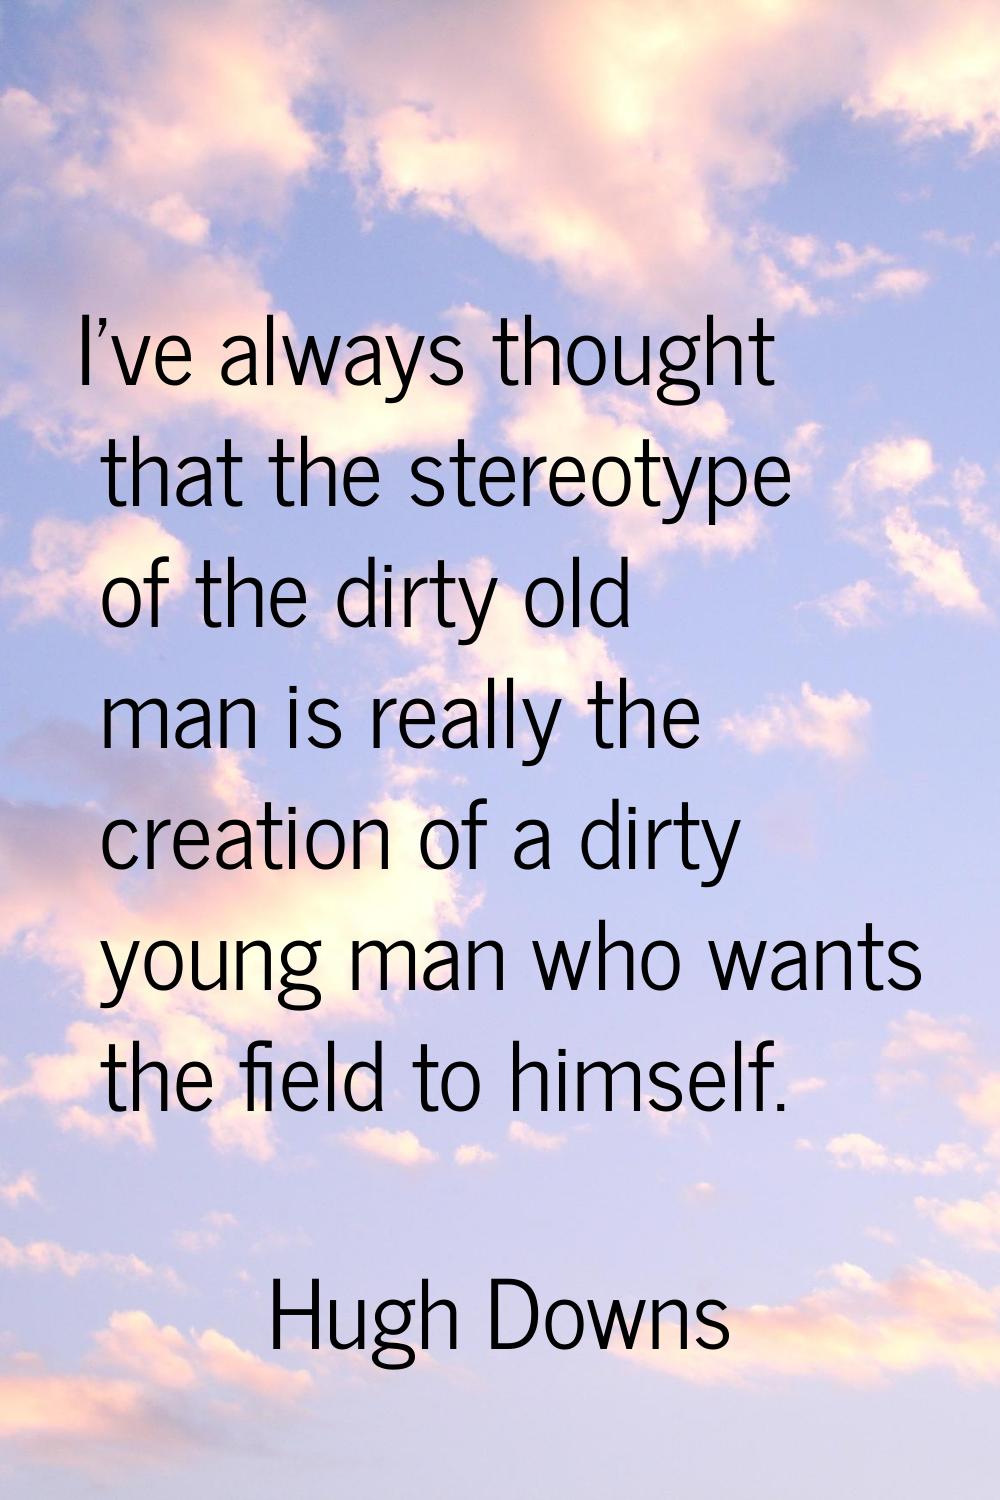 I've always thought that the stereotype of the dirty old man is really the creation of a dirty youn